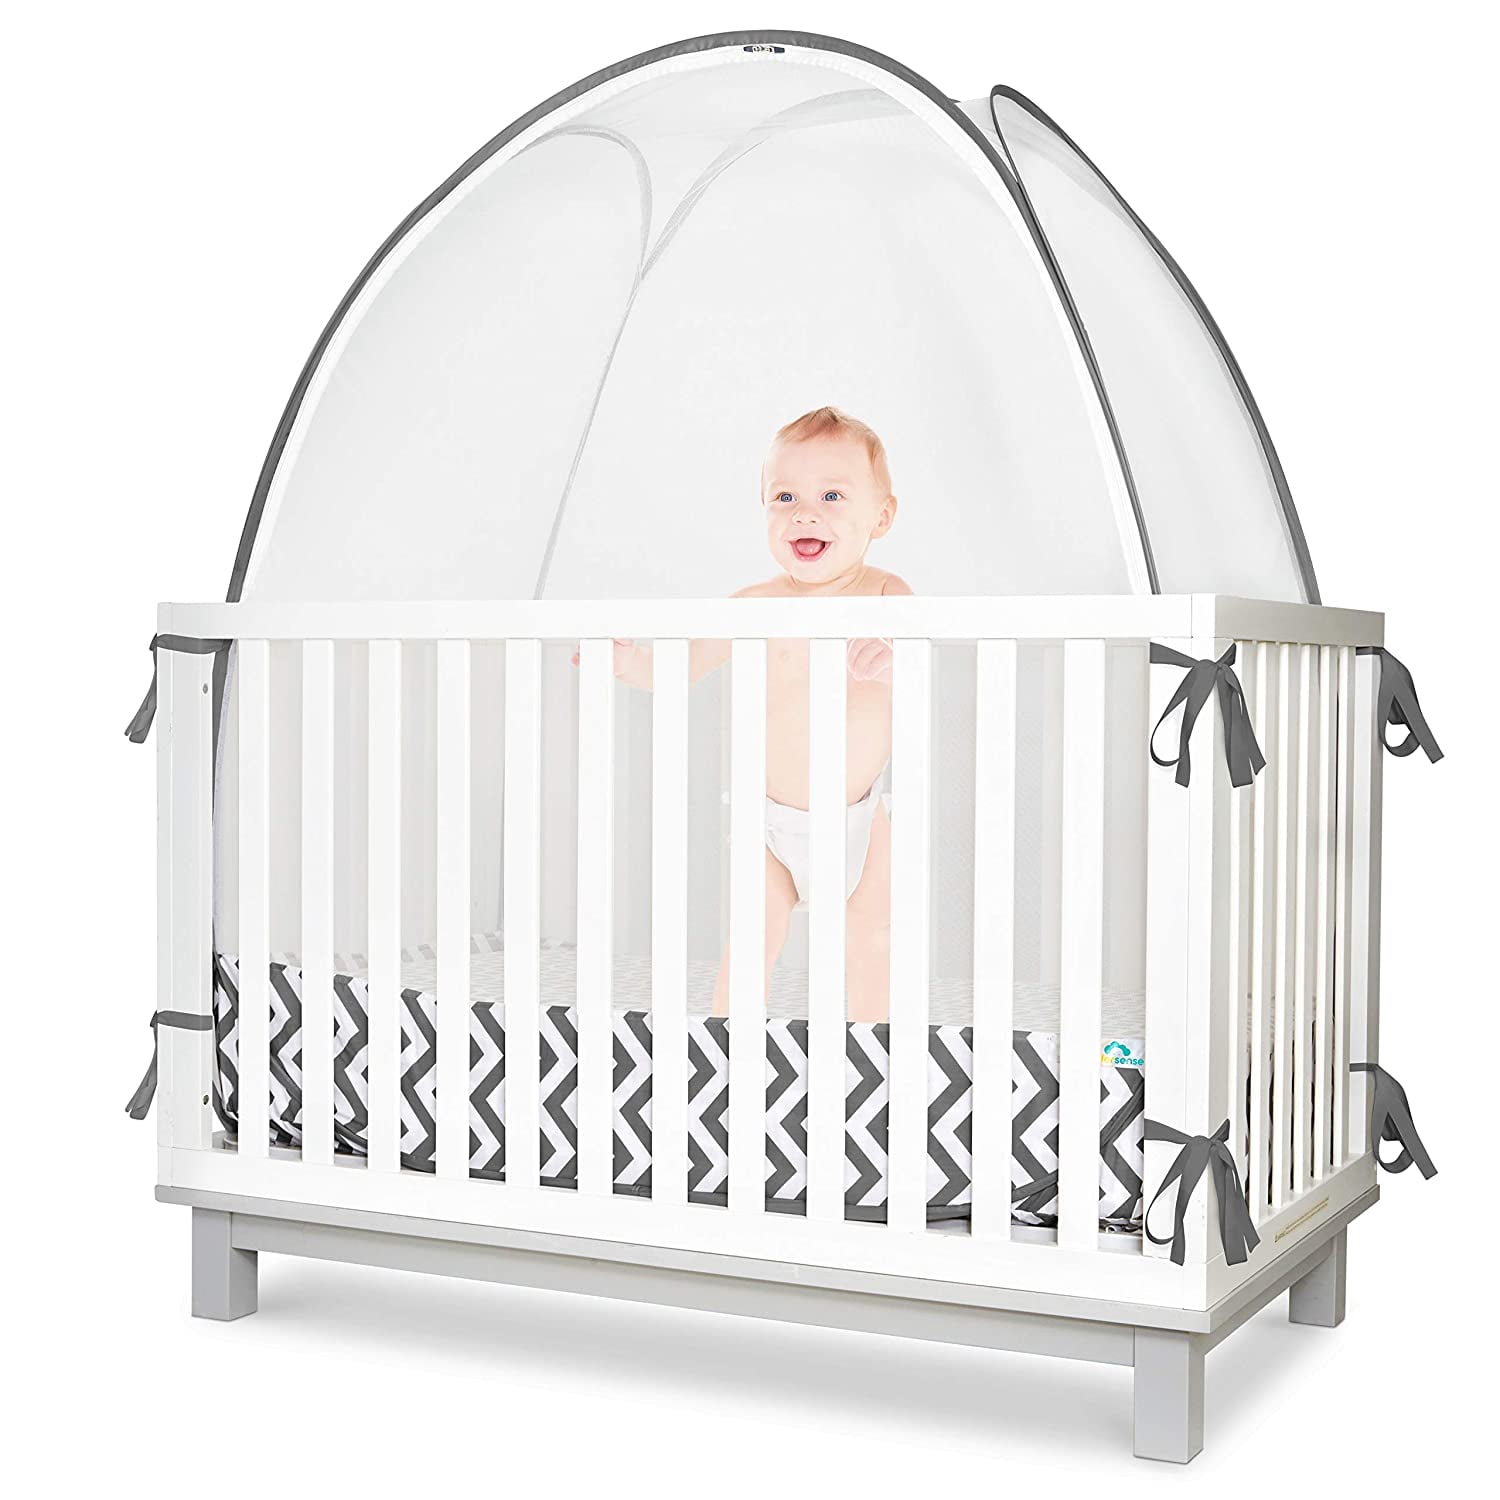 Black ZXPLO Safety Crib Tent to Keep Baby in Pop up Mosquito Net Netting Canopy Mesh Cover for Toddler 